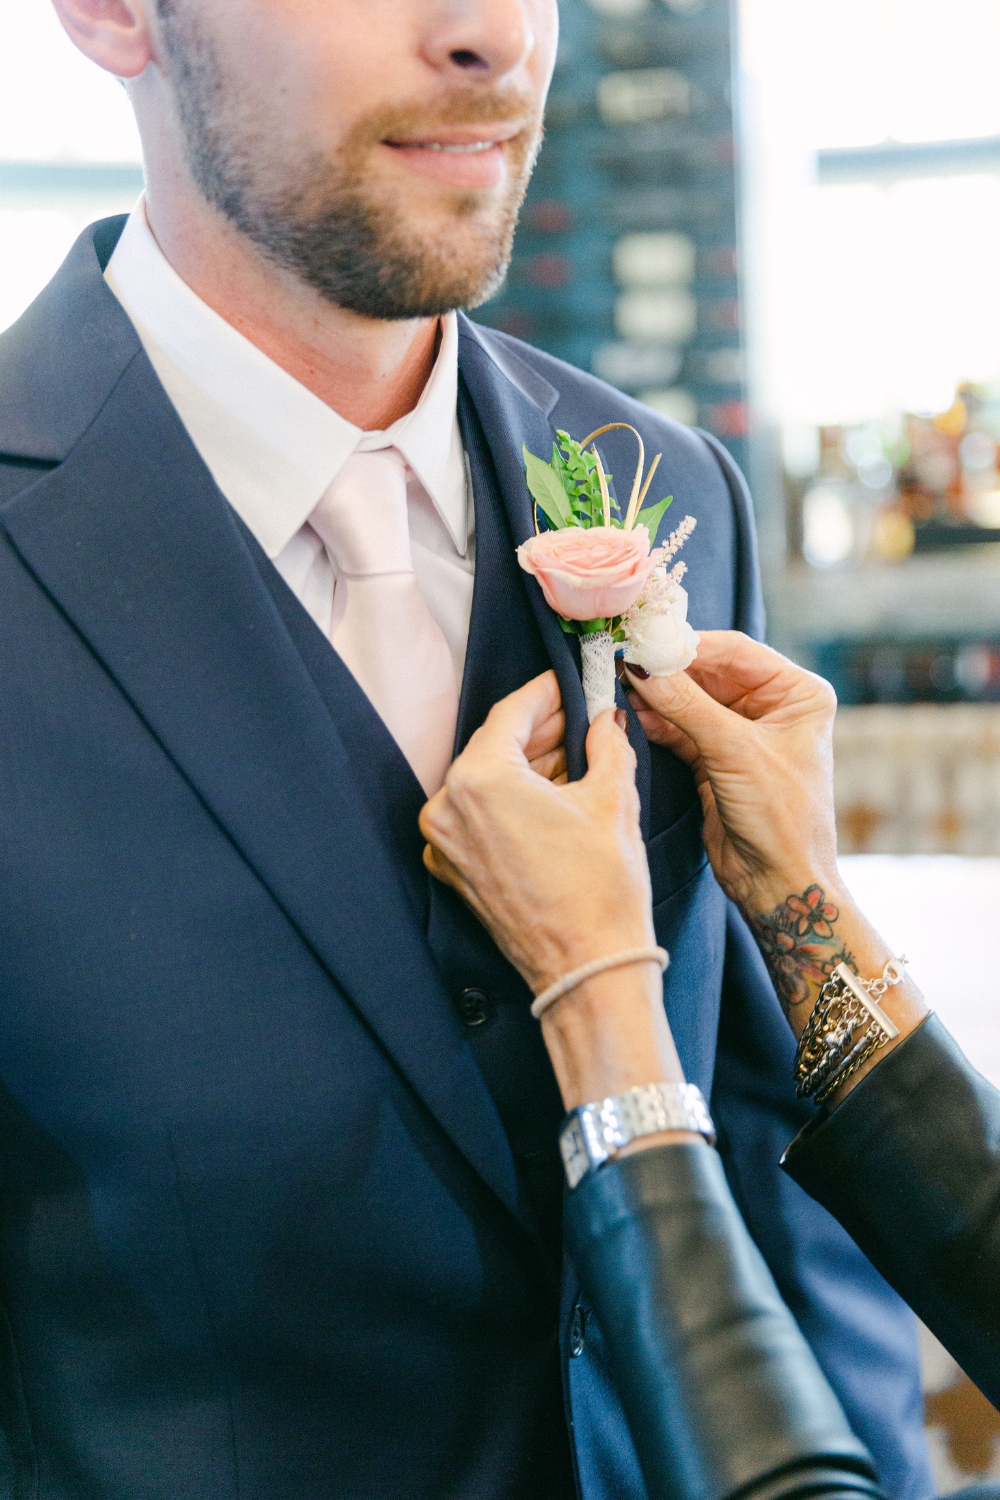 Groom getting ready for wedding with boutonniere